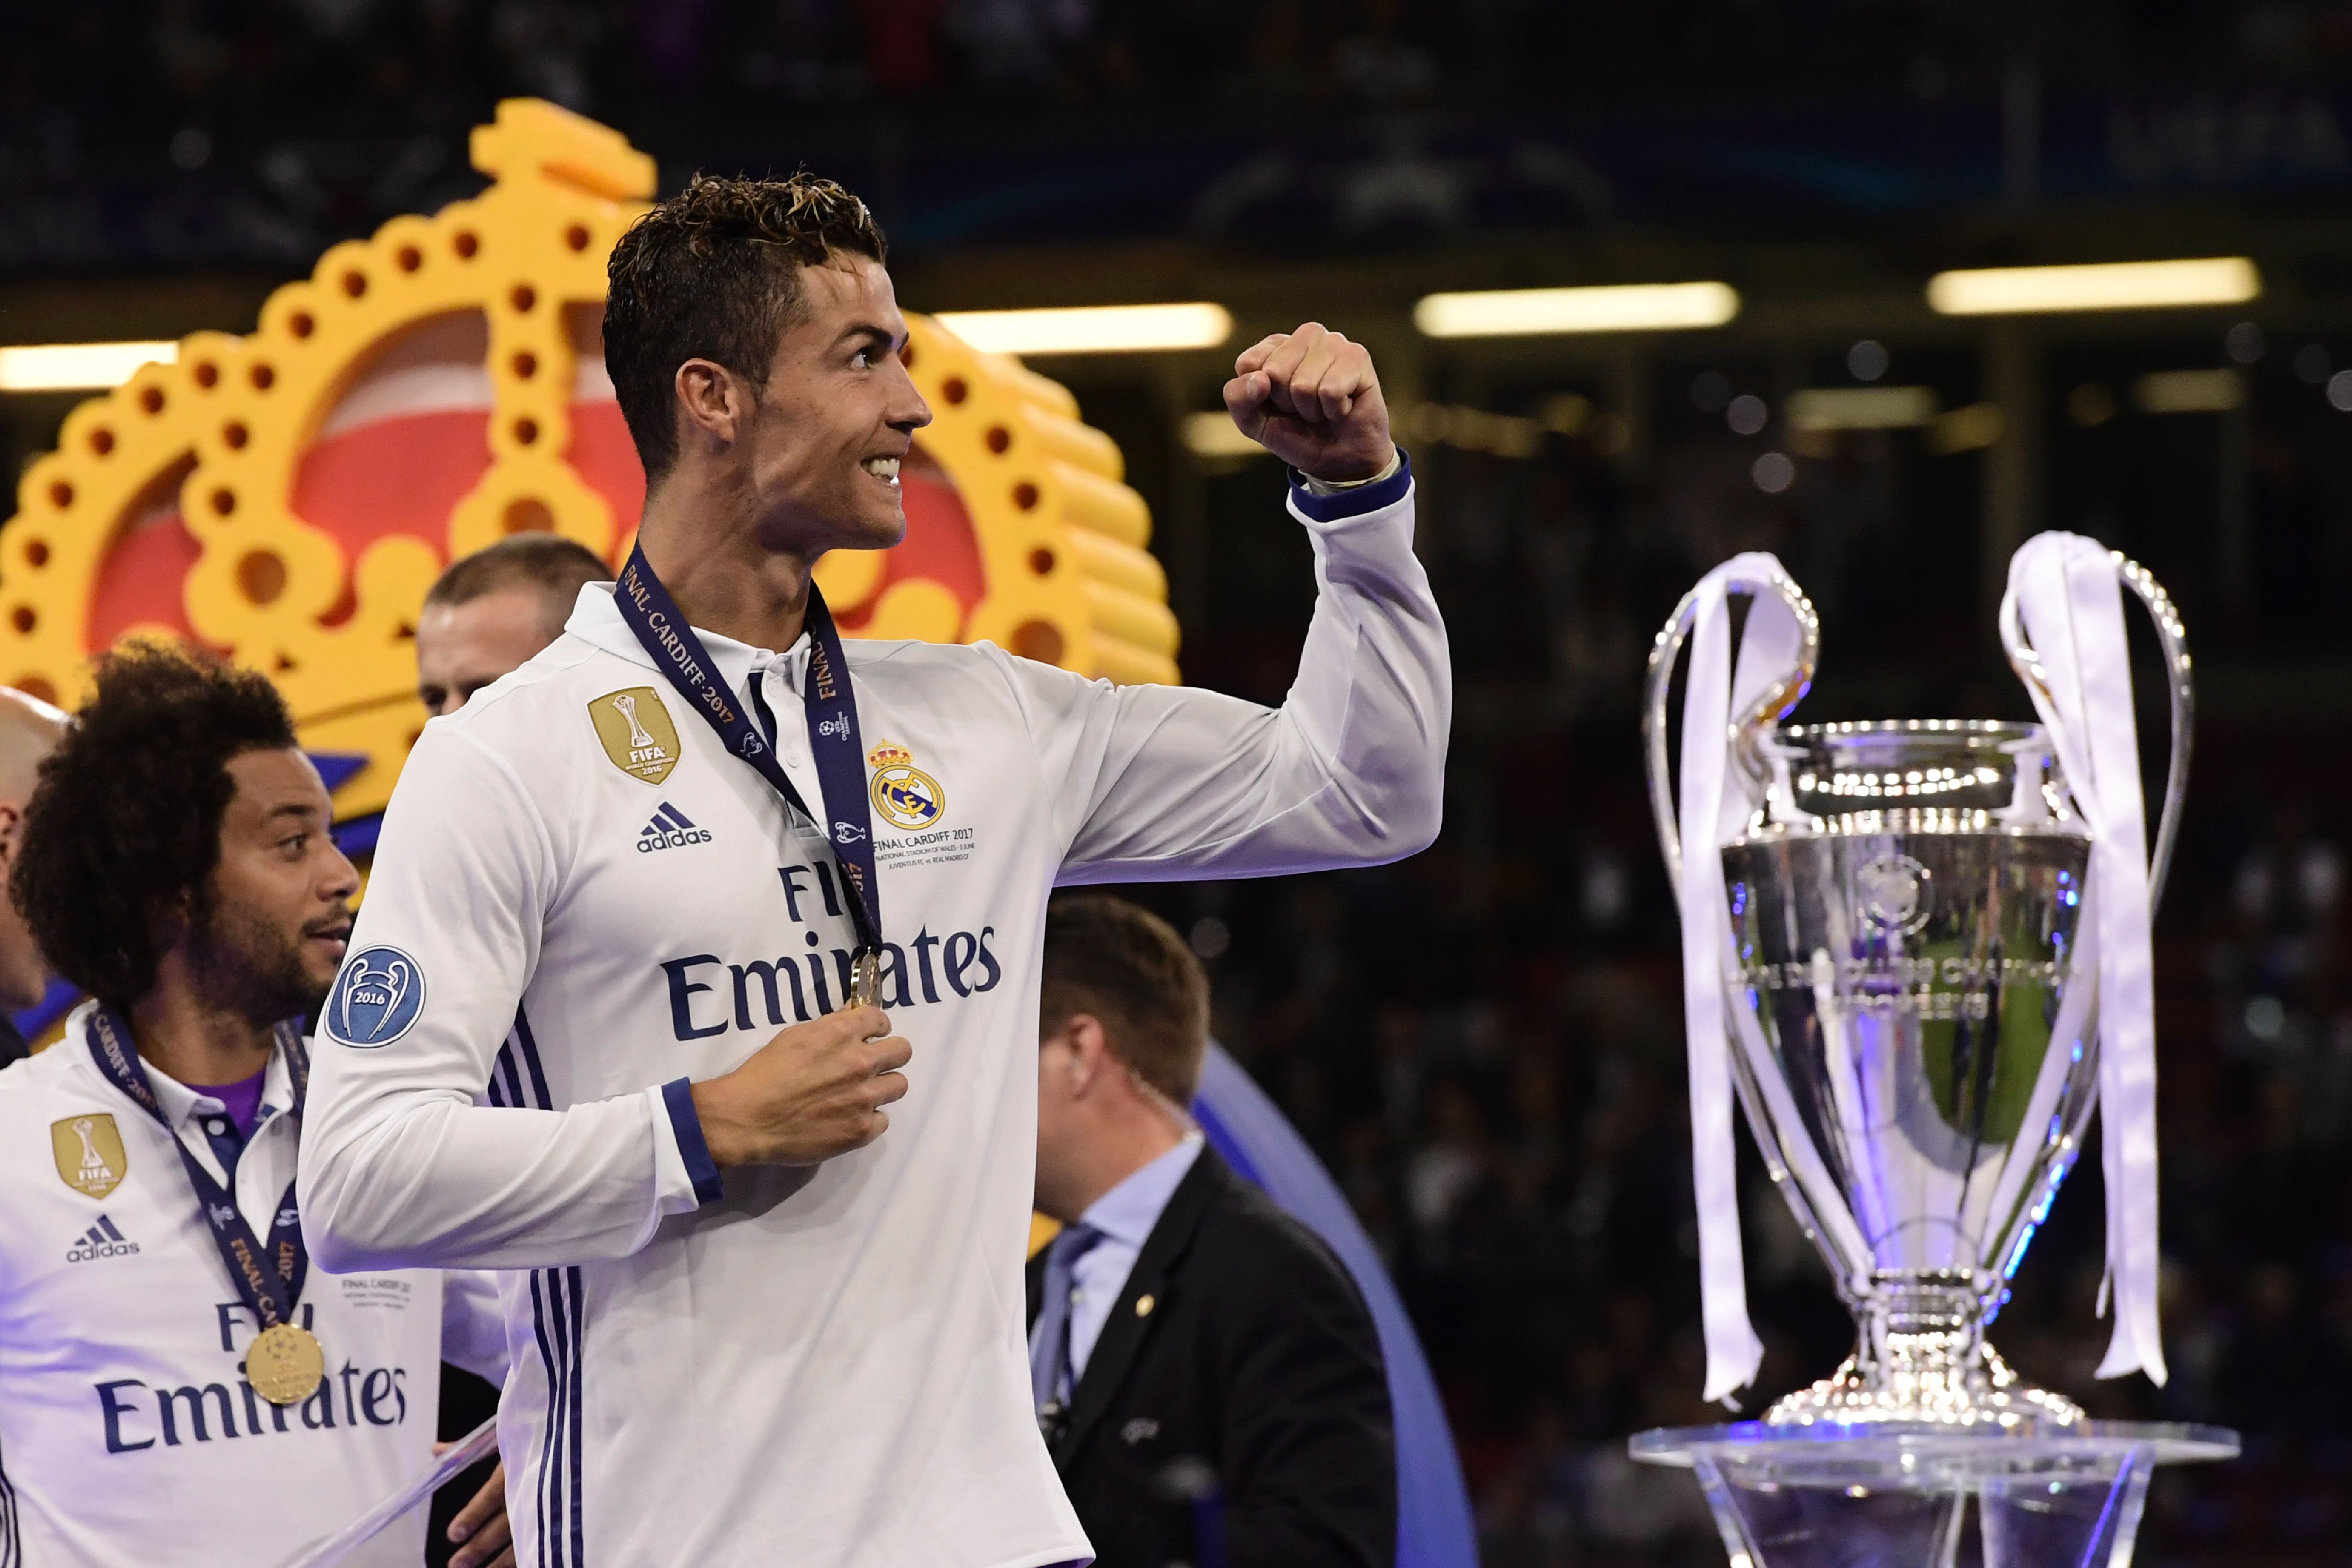 Real Madrid's Portuguese striker Cristiano Ronaldo celebrates next to the trophy after Real Madrid won the UEFA Champions League final football match between Juventus and Real Madrid at The Principality Stadium in Cardiff, south Wales, on June 3, 2017. / AFP PHOTO / JAVIER SORIANO        (Photo credit should read JAVIER SORIANO/AFP/Getty Images)